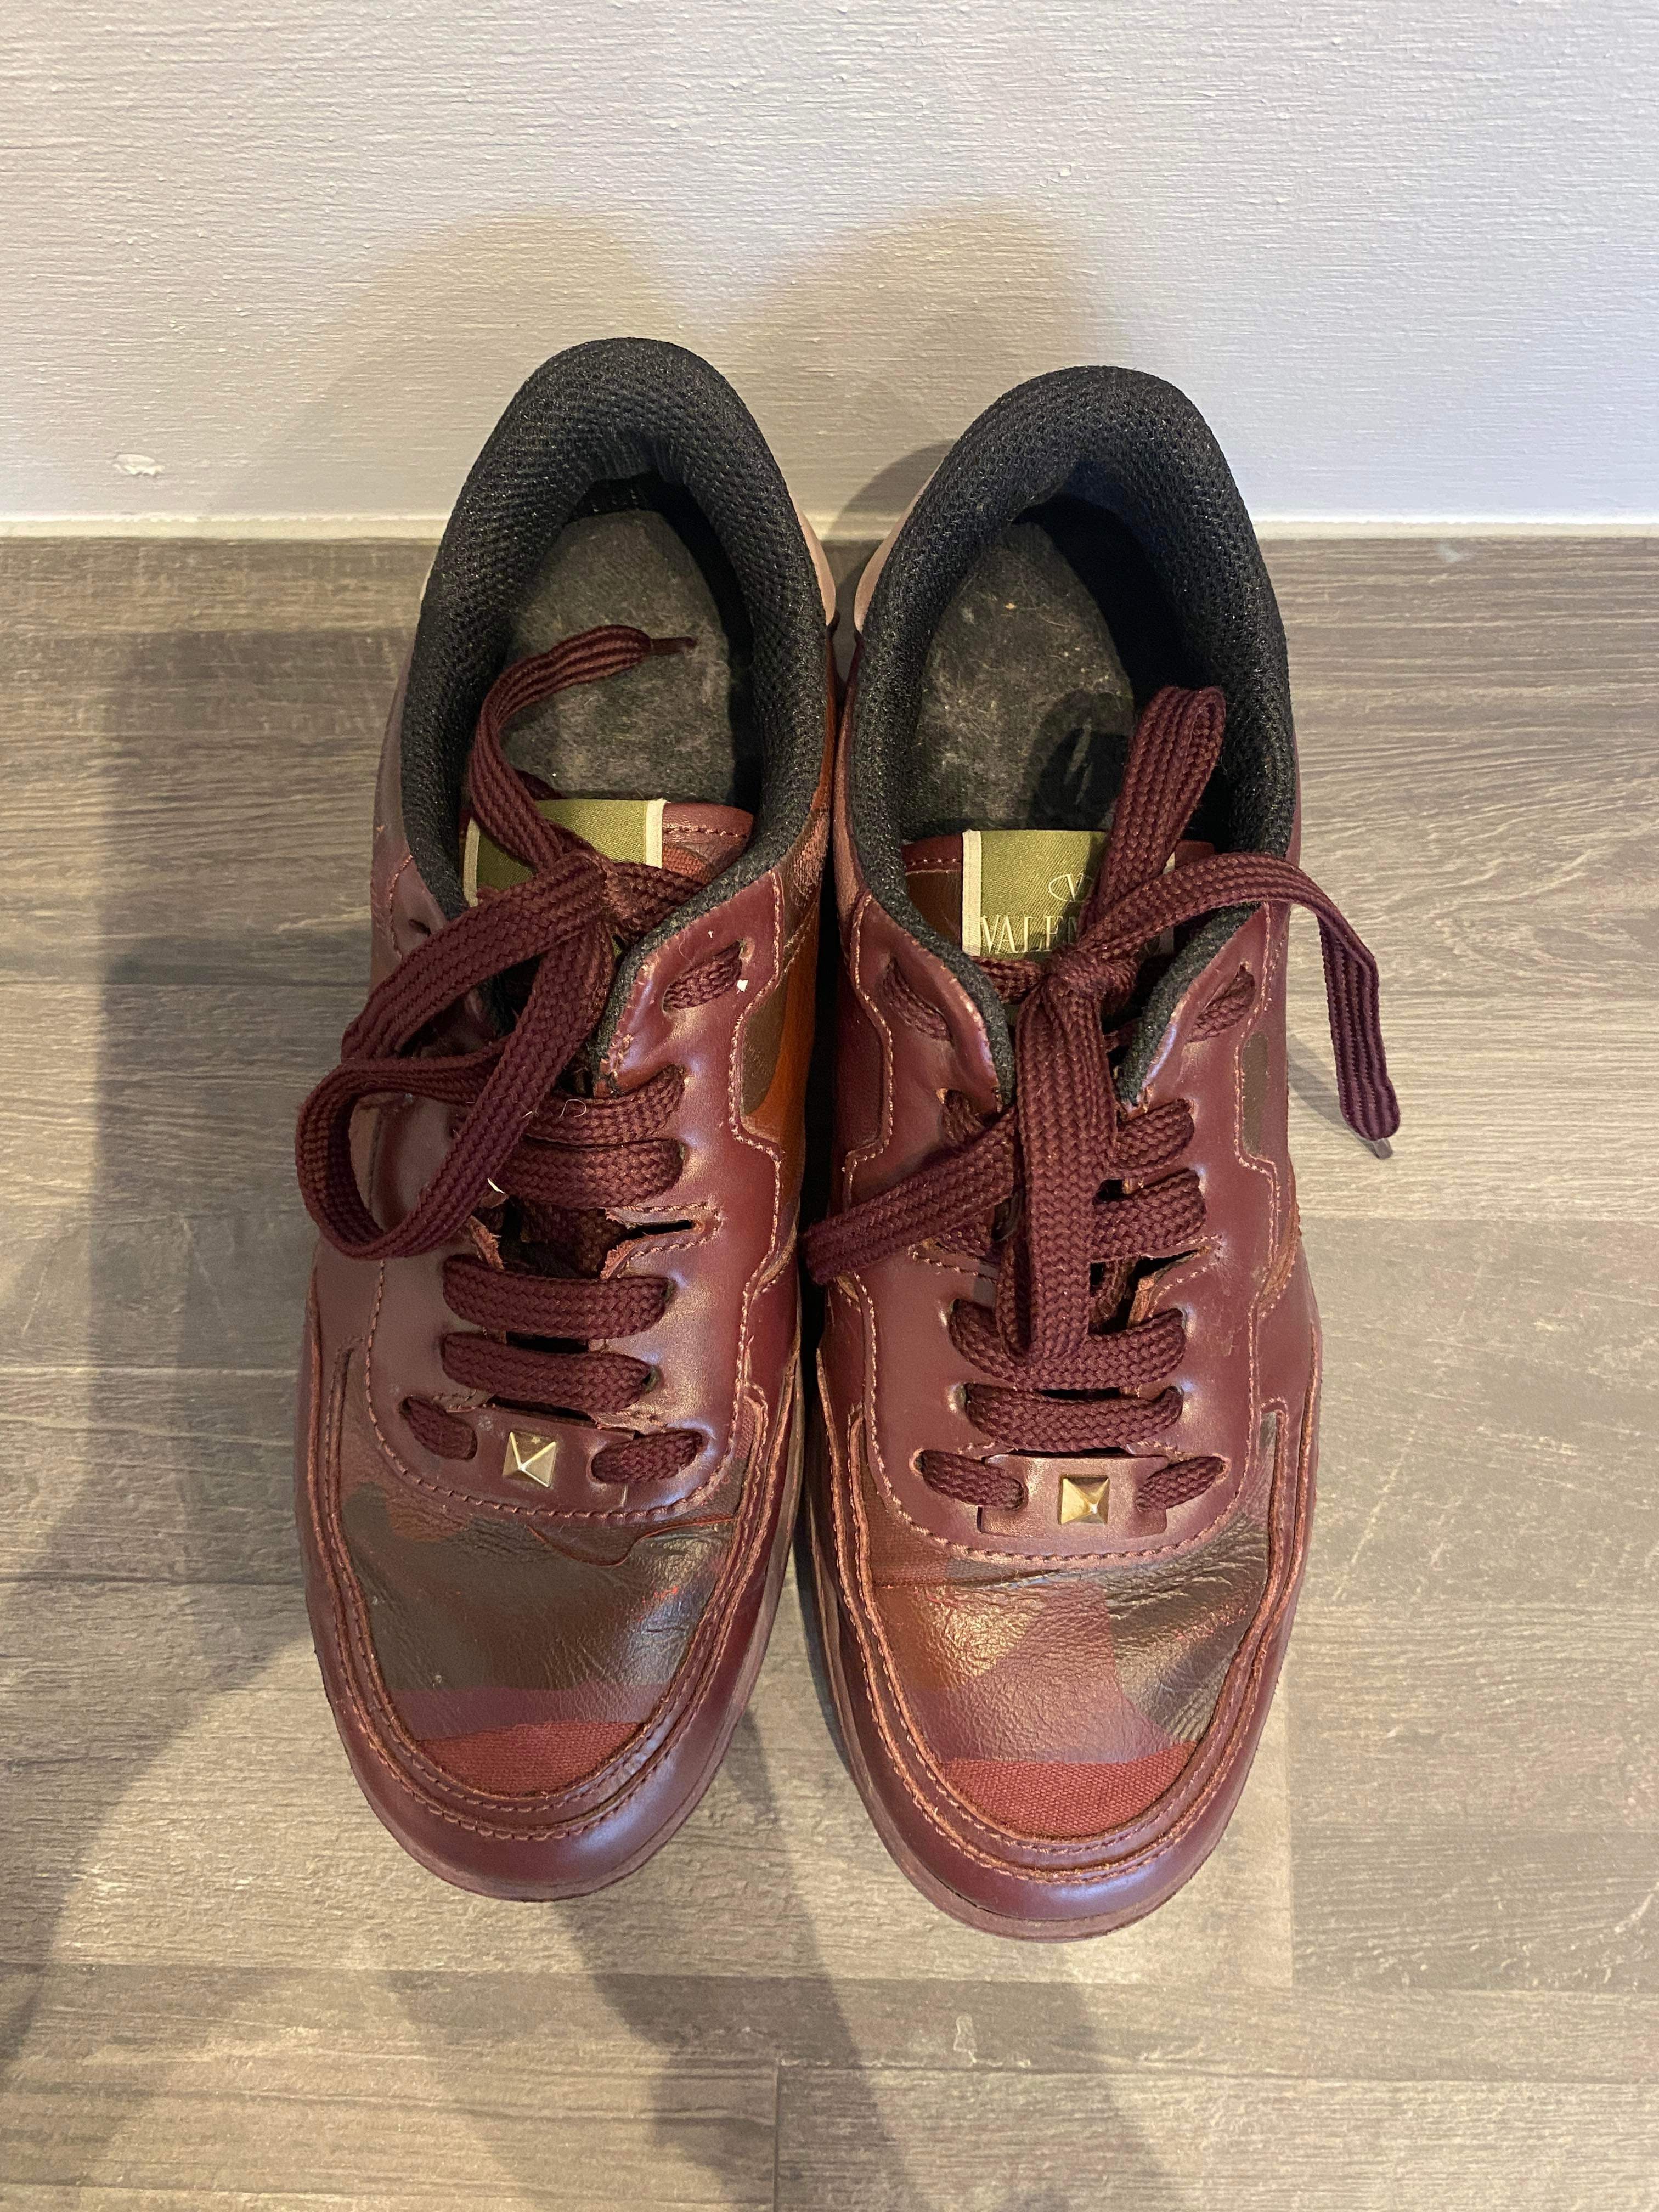 Valentino - Sneakers - Size: 37